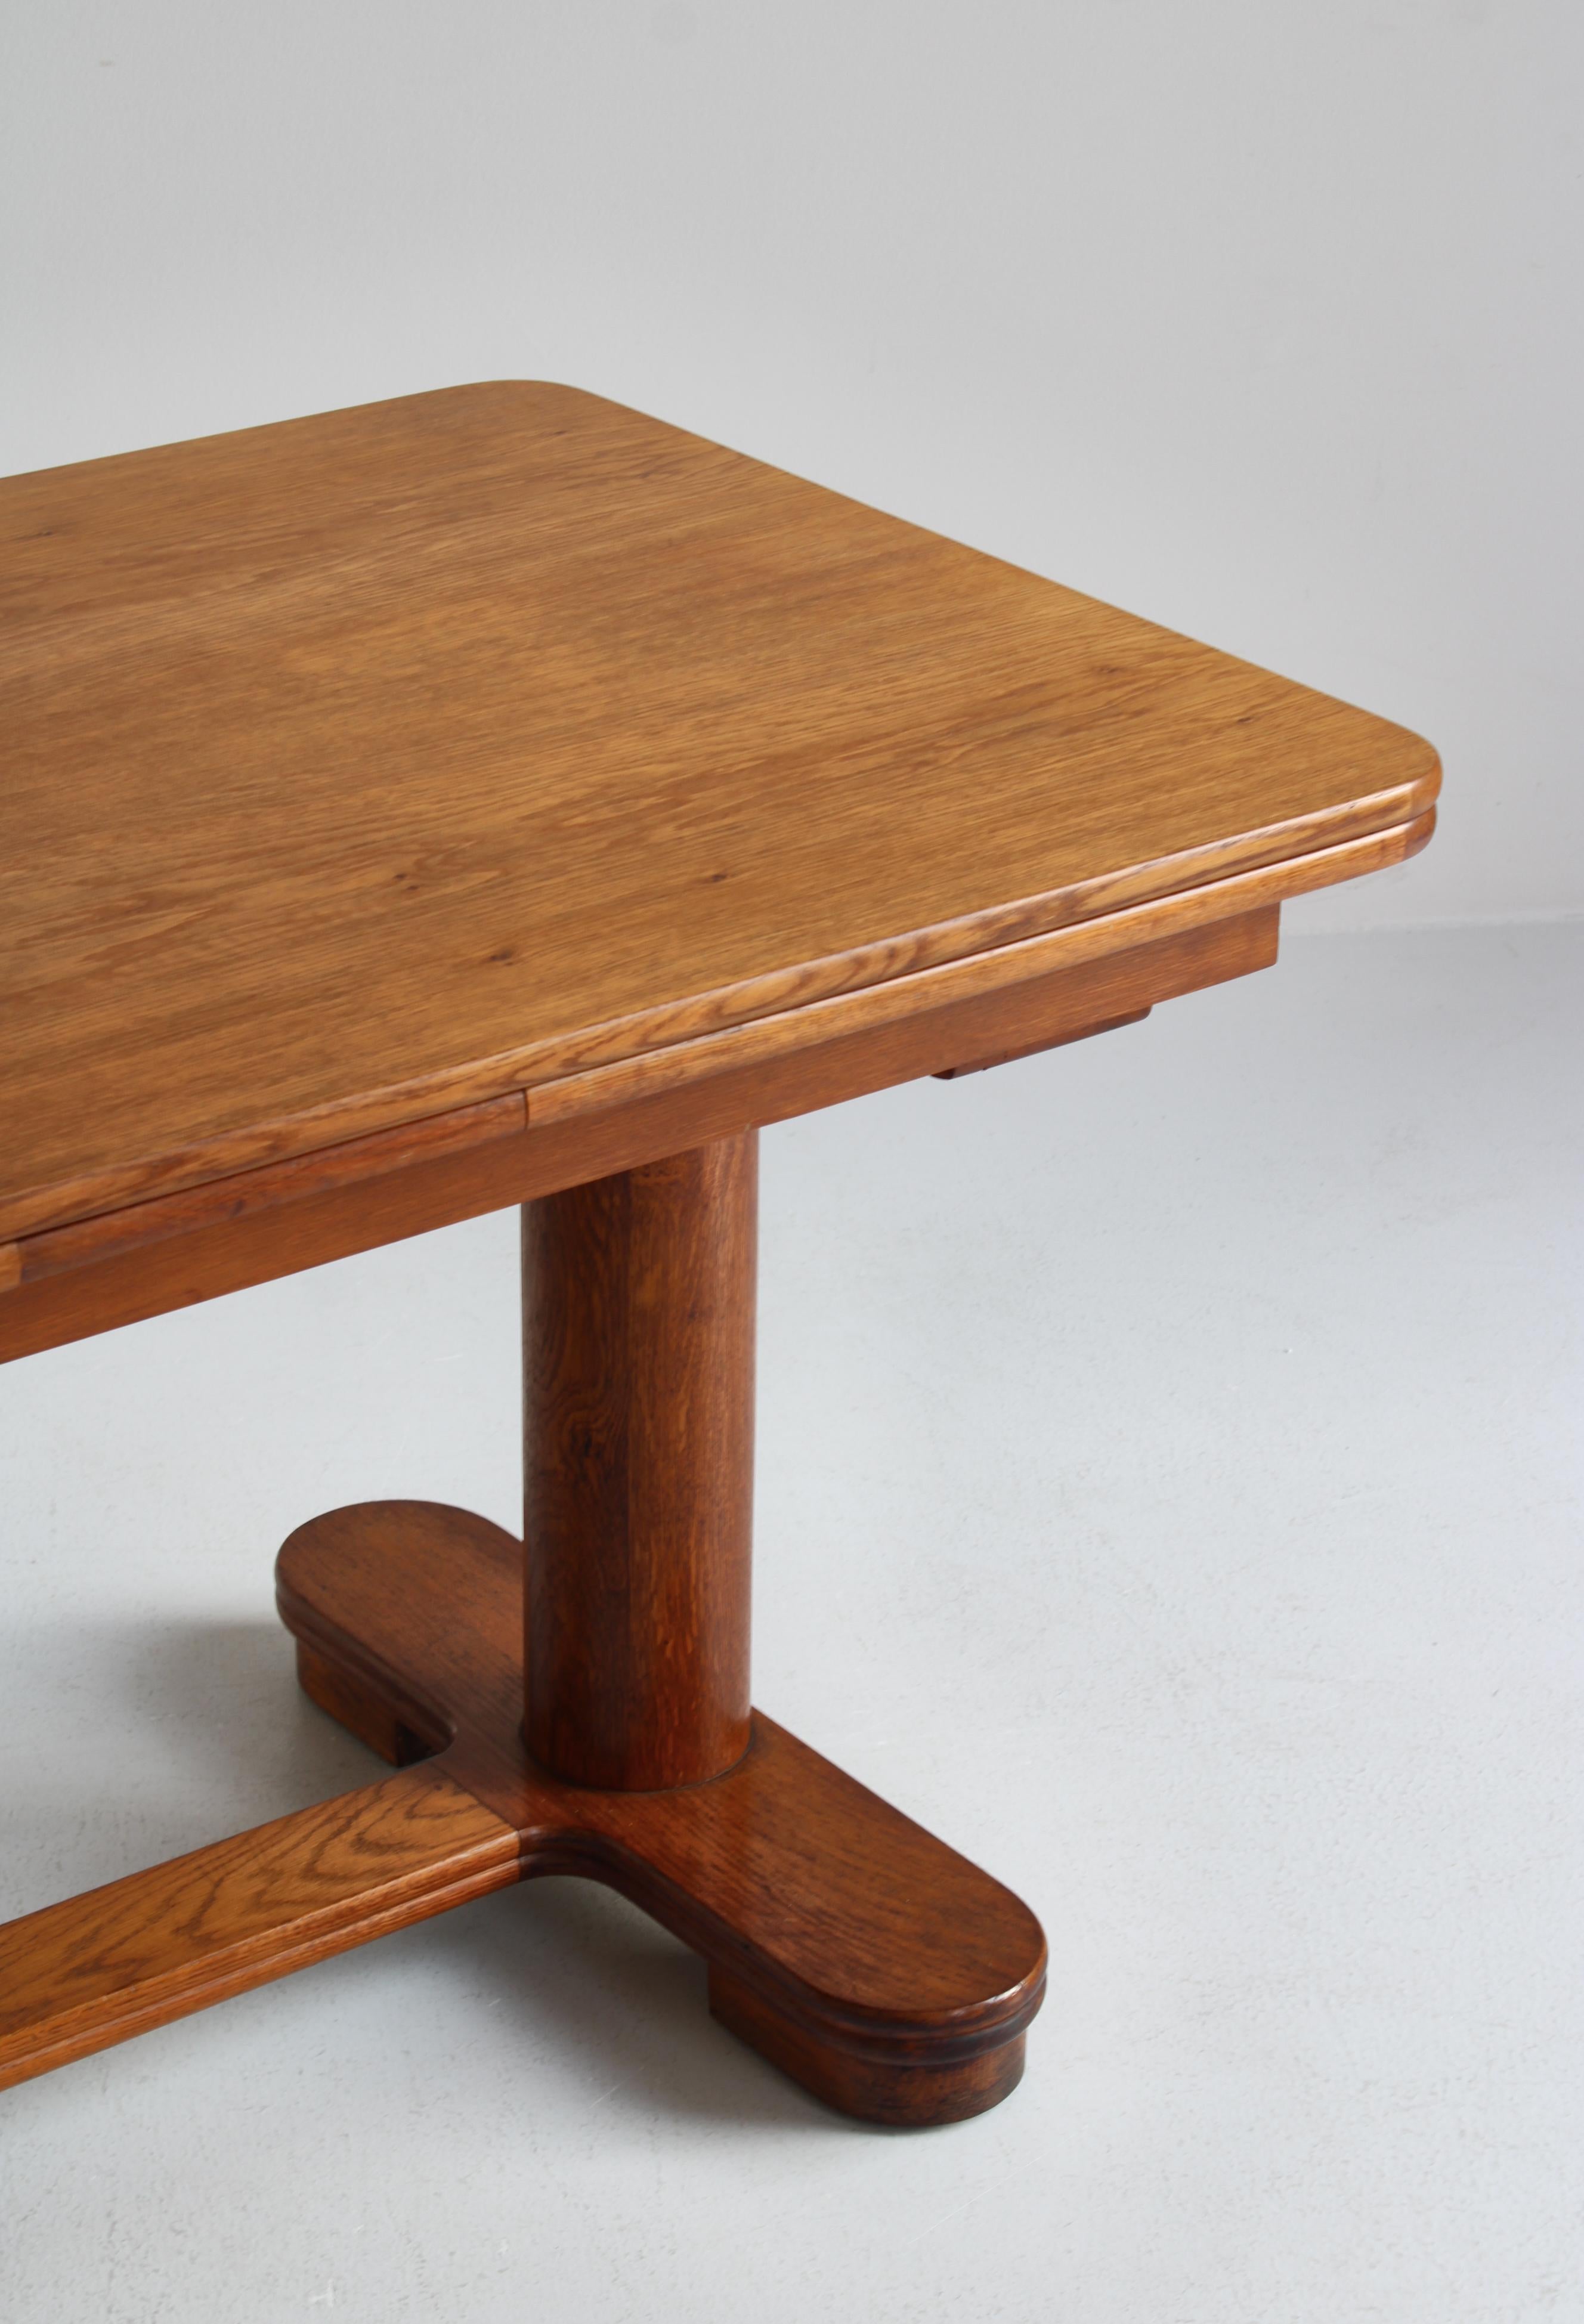 Art Deco Table by Danish Cabinetmaker in Patinated Oak, 1930s For Sale 1